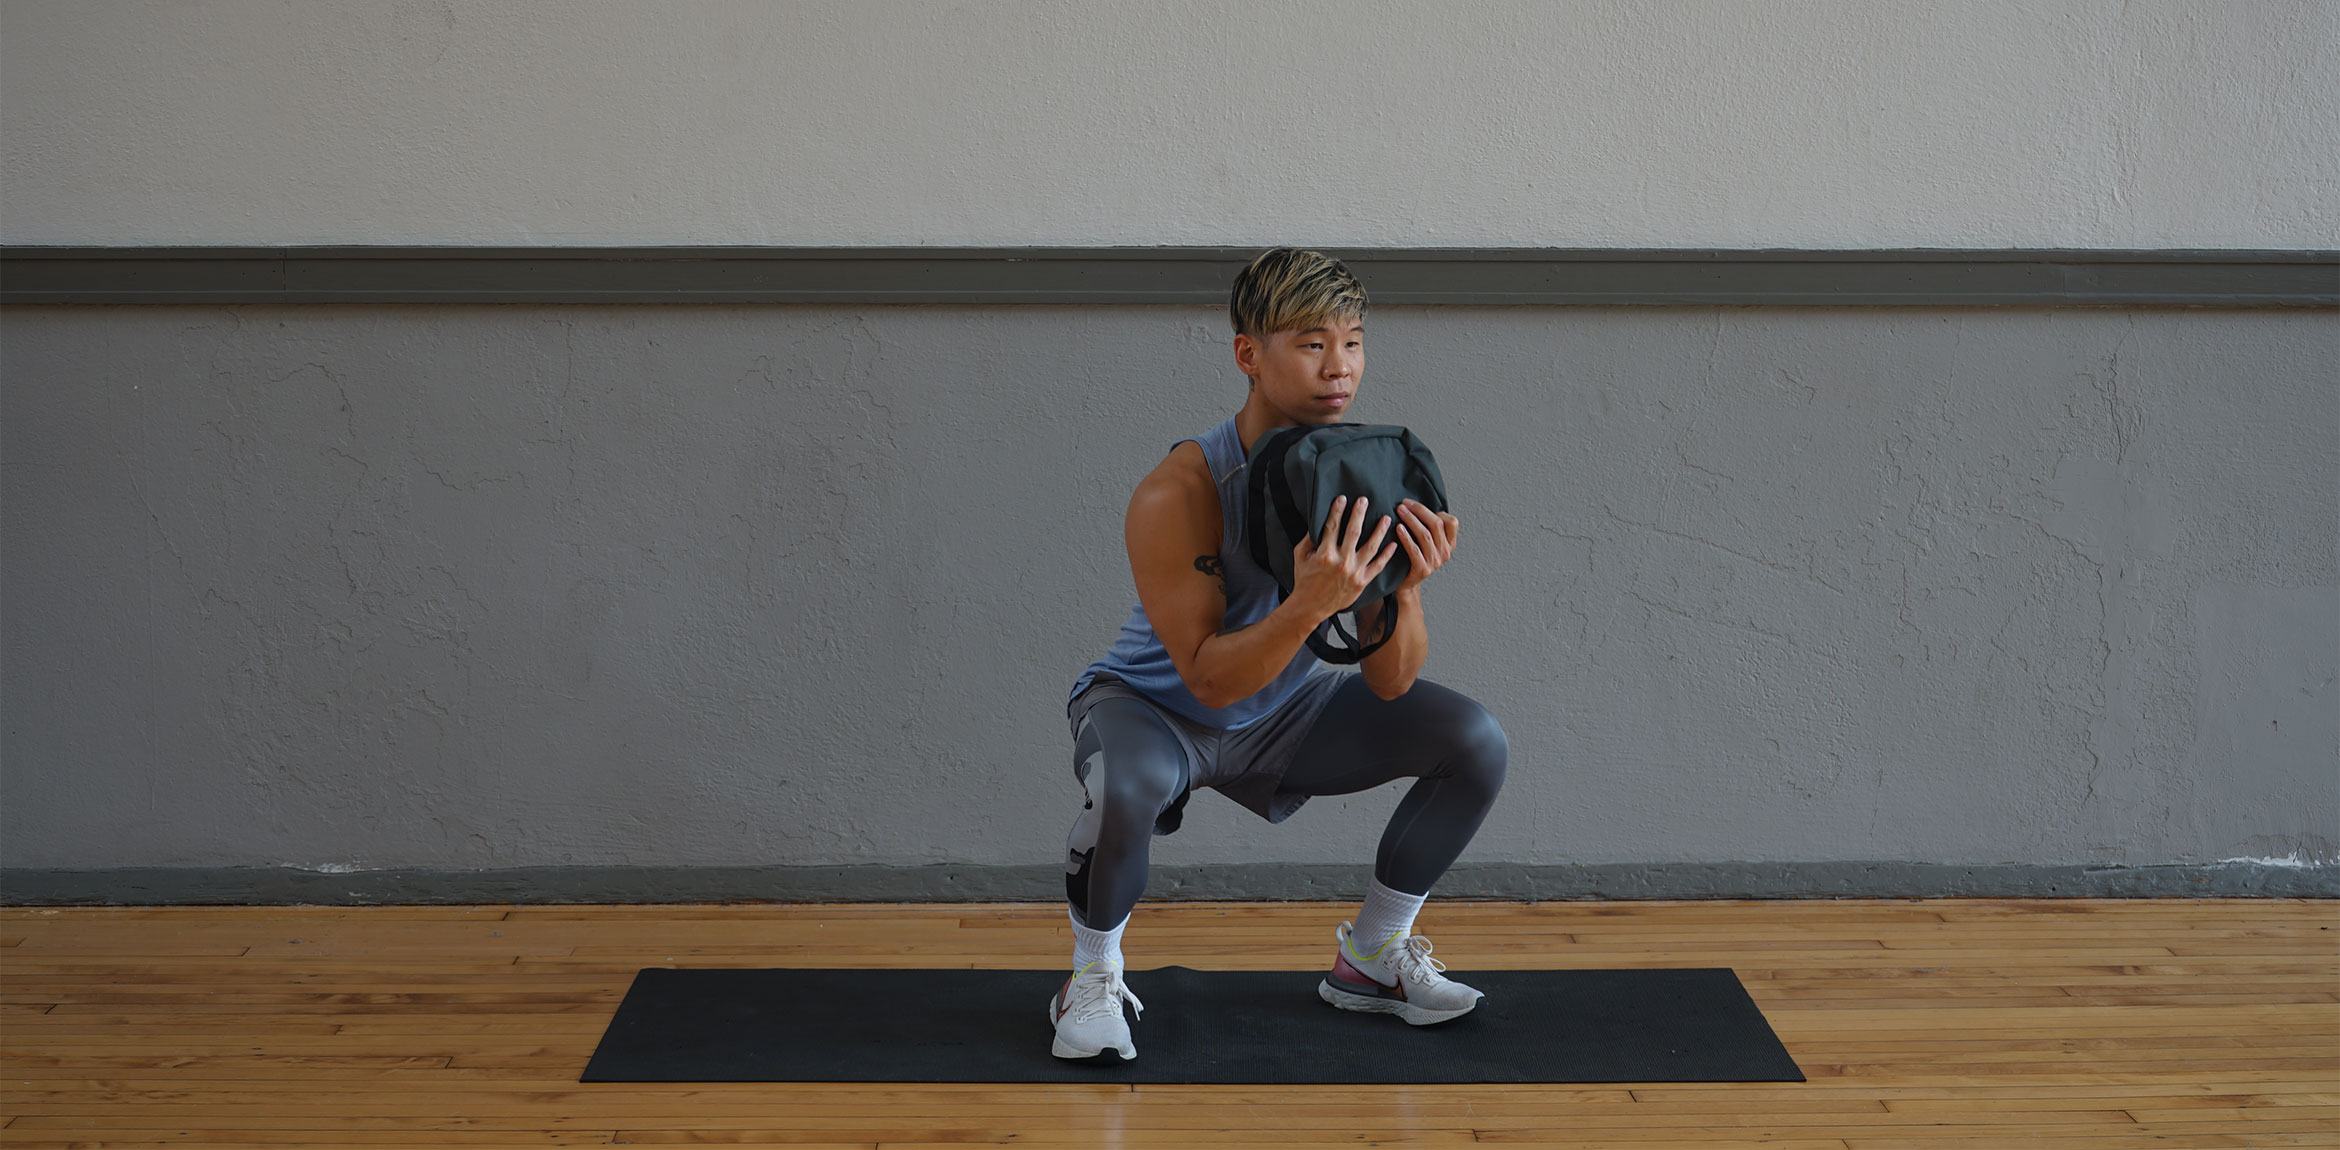 Yowshien Kuo squats on a yoga mat, holding a sandbag to his chest.